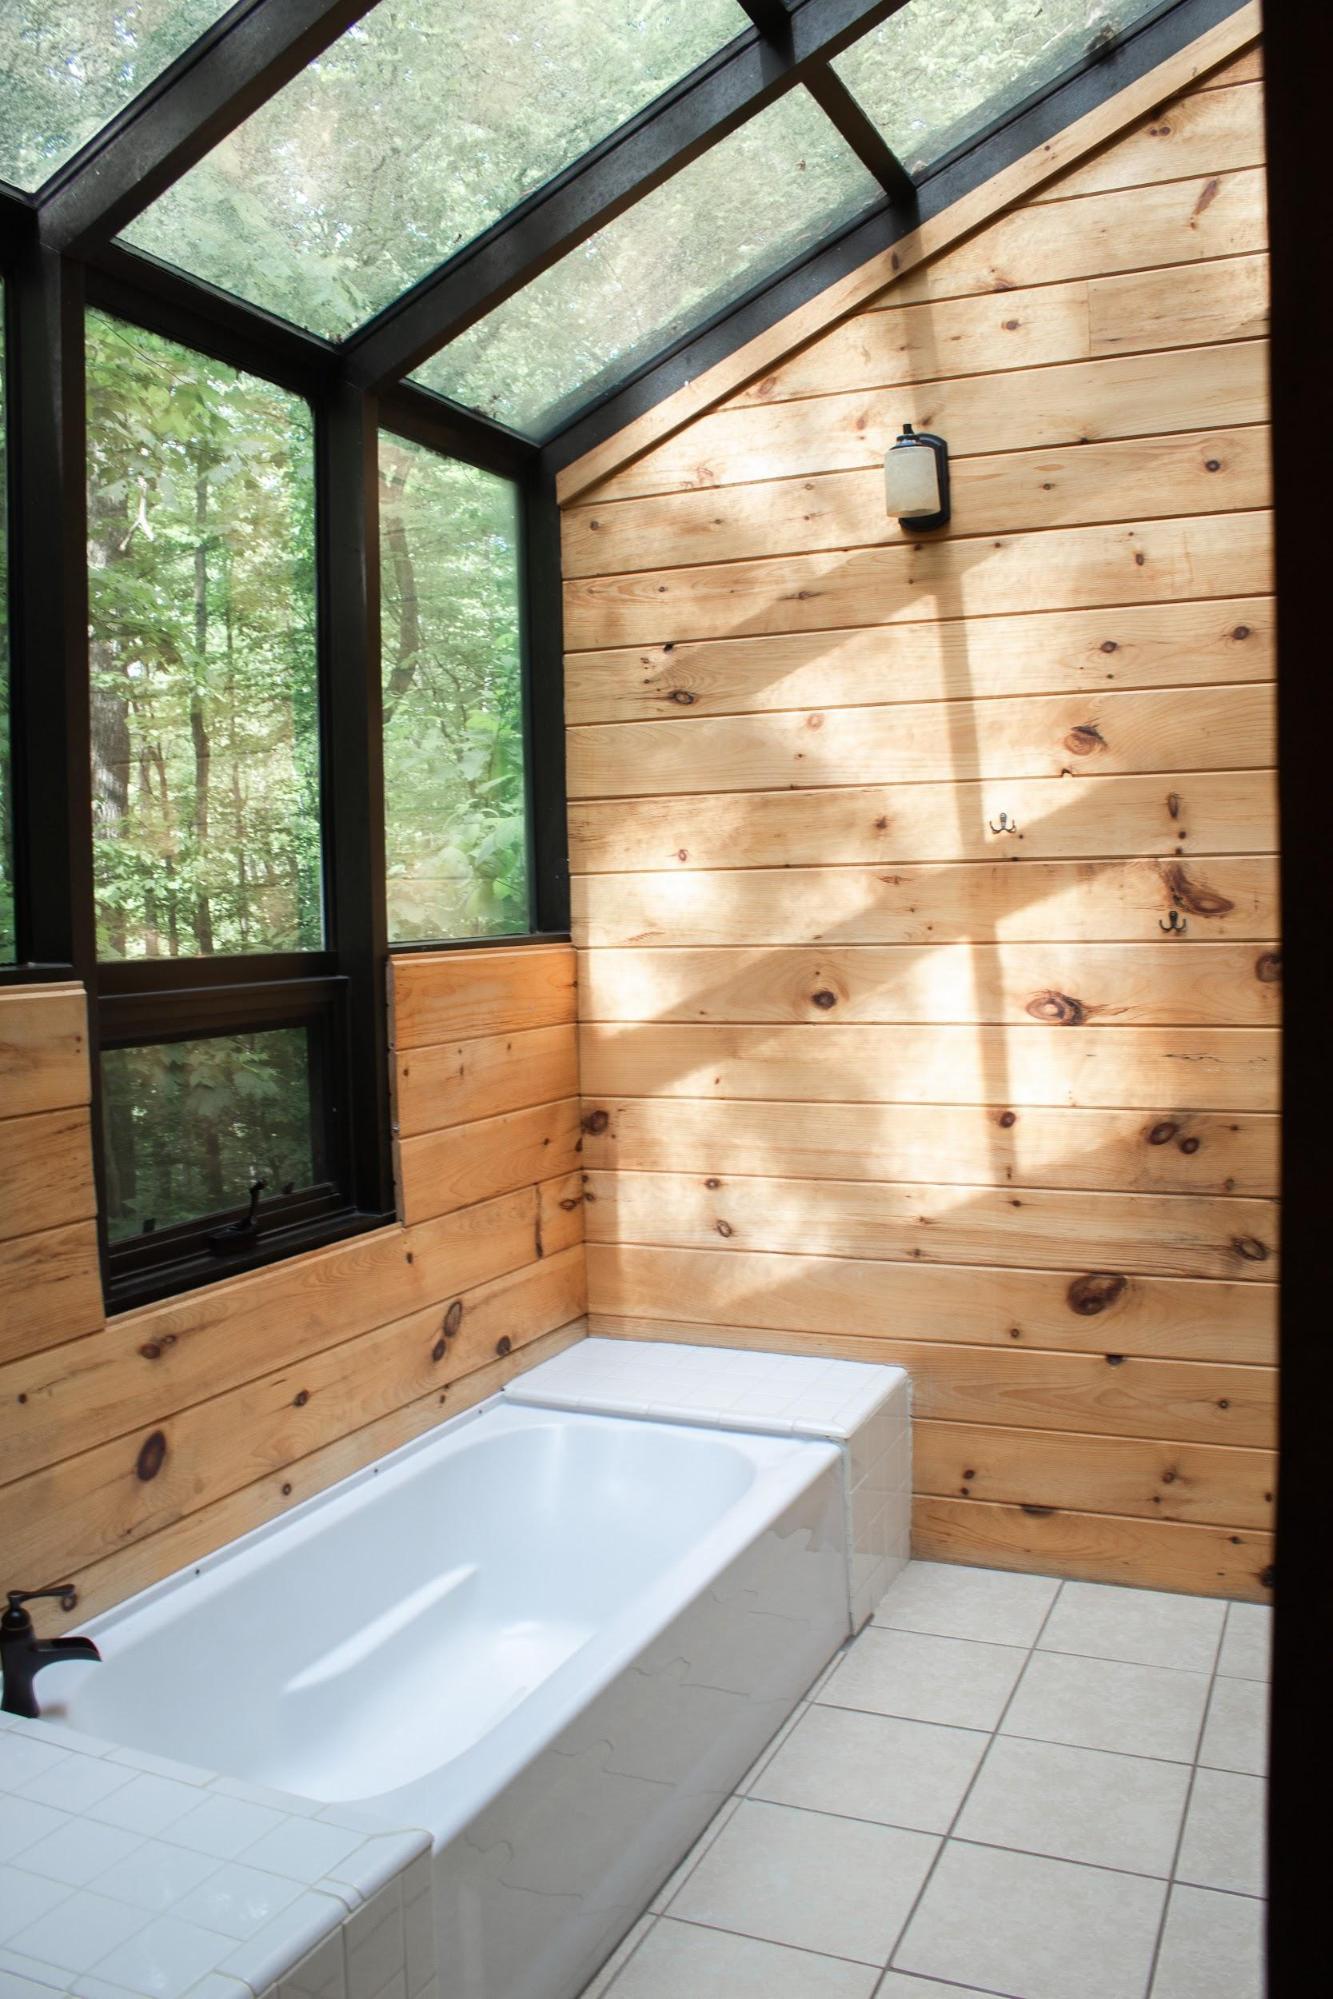 Rustic Bathrooms To Fulfill Your Log Cabin Dream